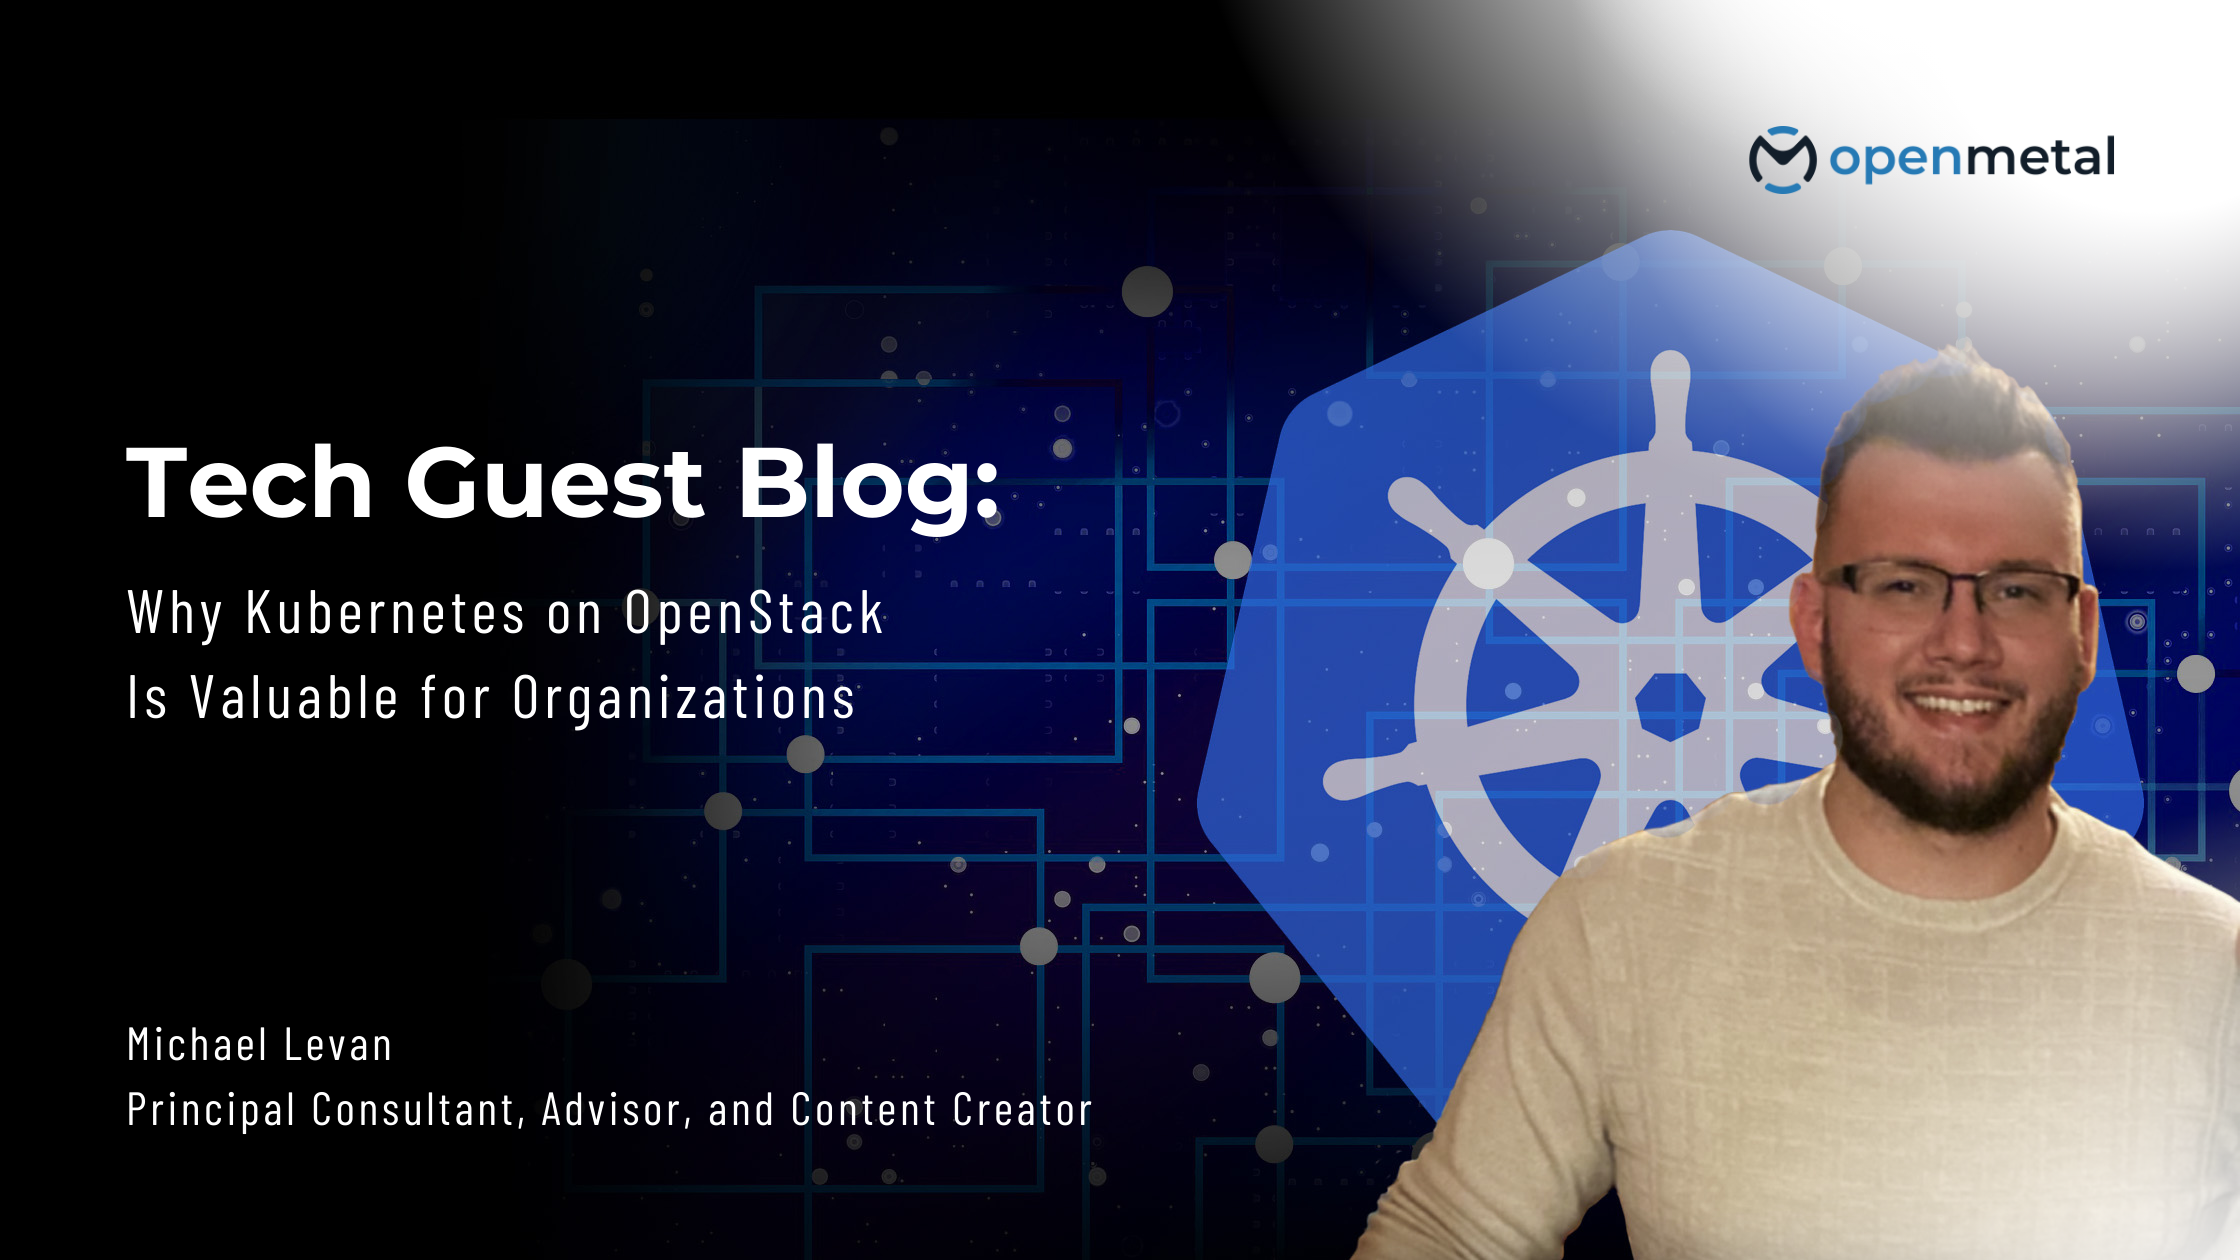 Why Kubernetes on OpenStack is Valuable for Organizations